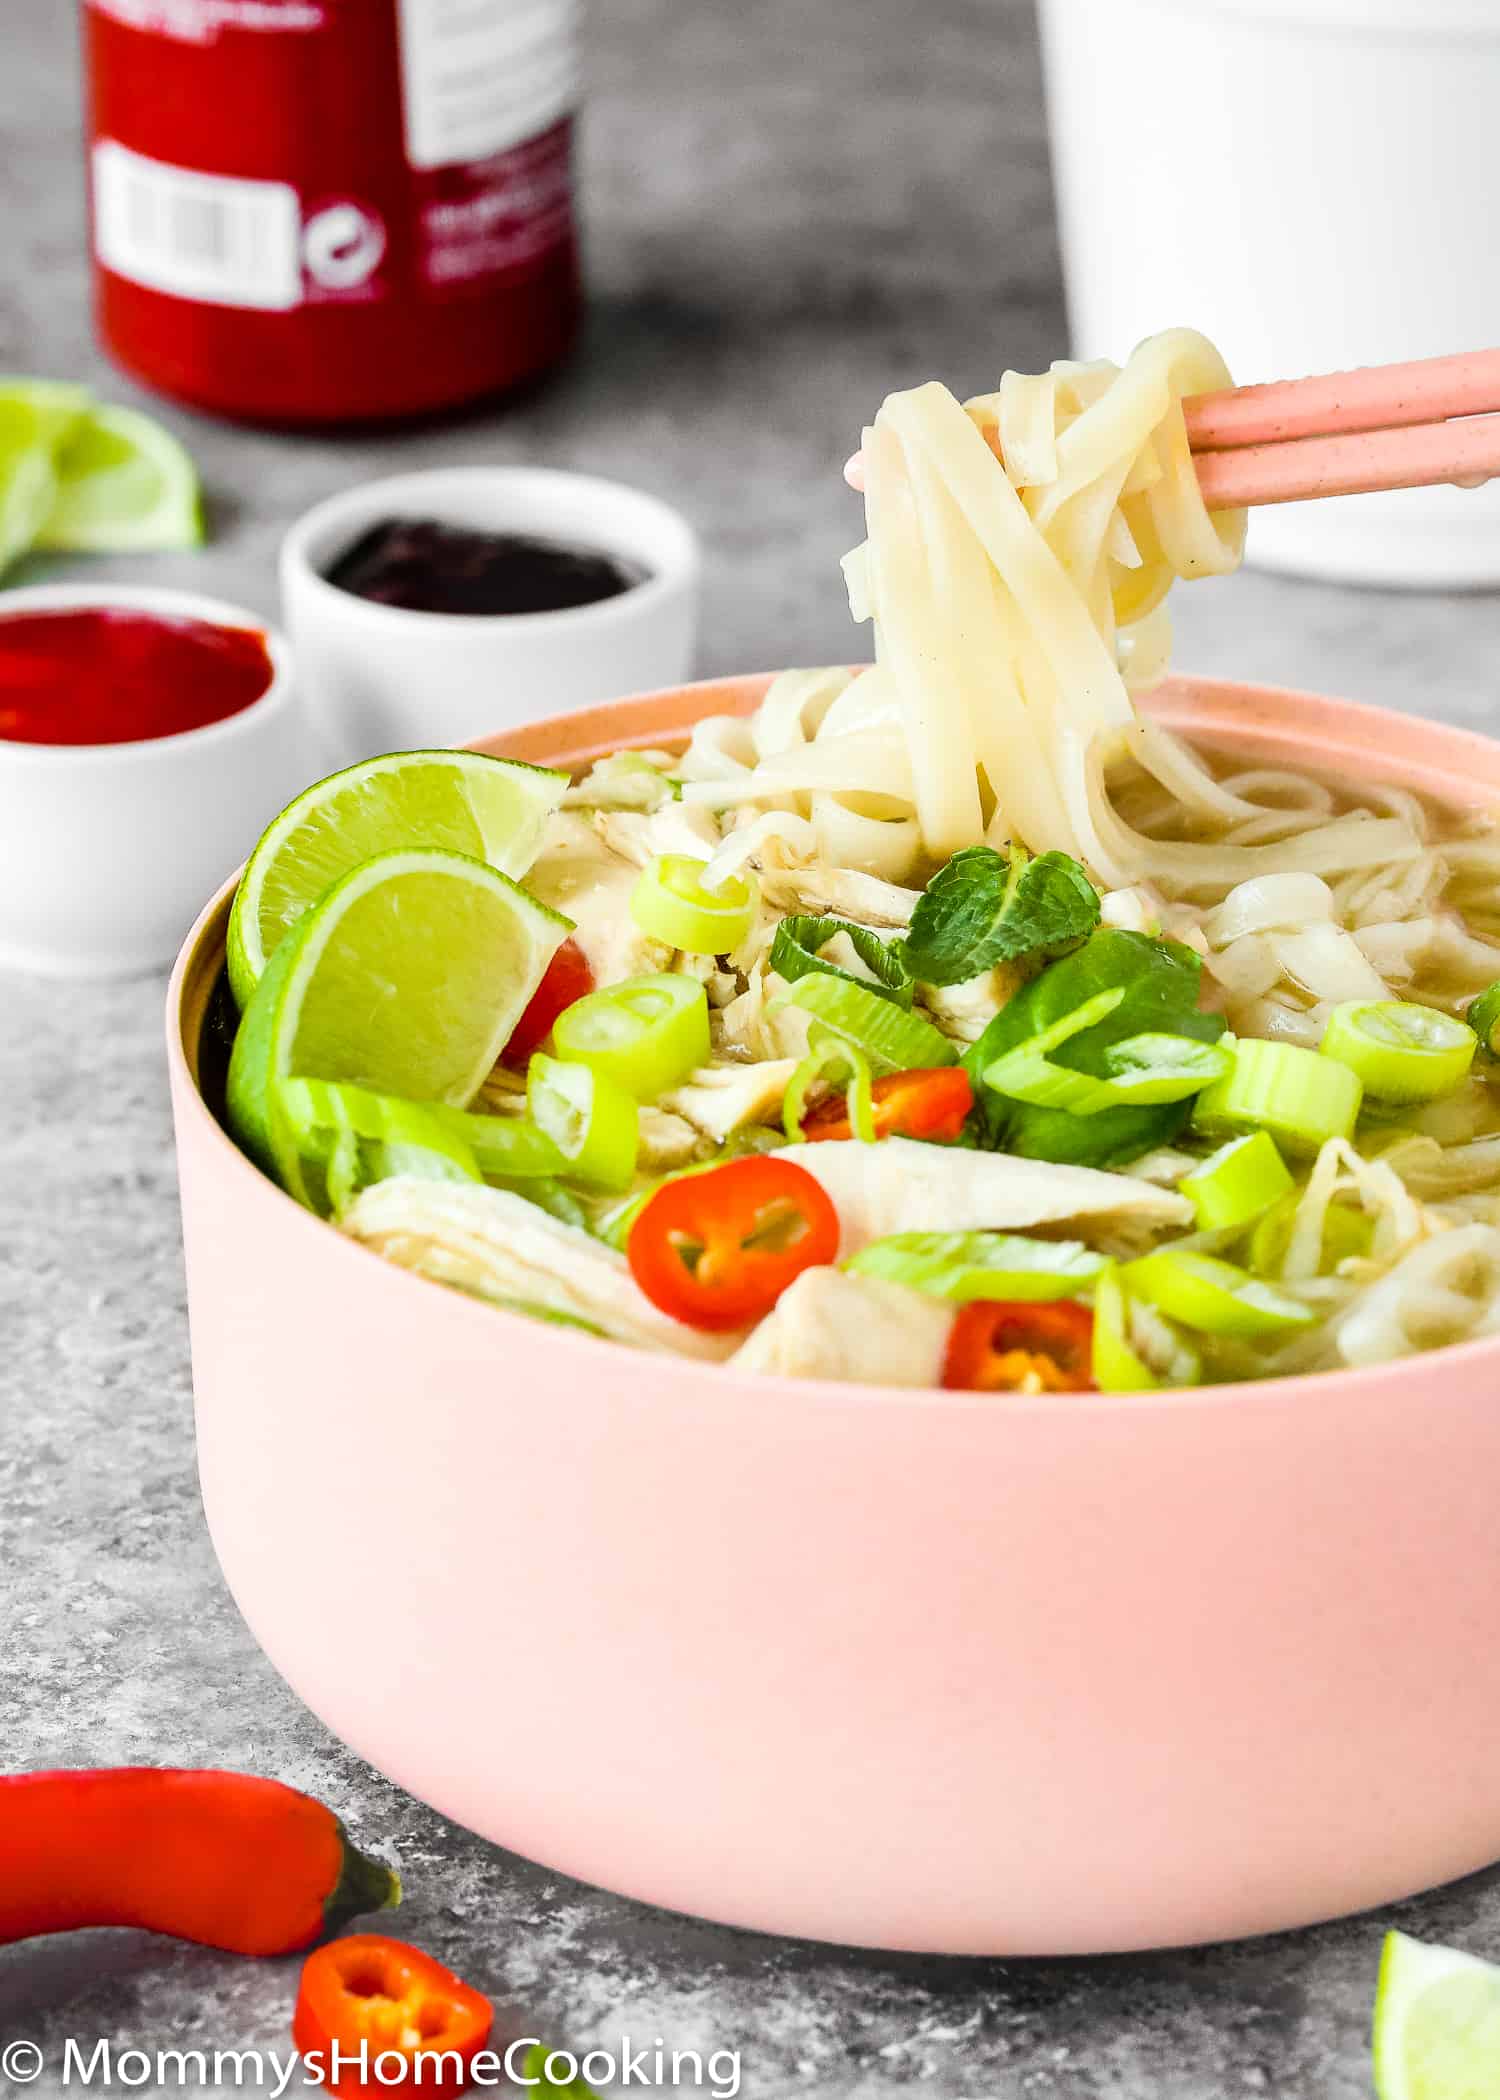 This Easy Instant Pot Chicken Pho is light, fragrant and totally delicious! Made from scratch and in a fraction of the time, this Vietnamese soup recipe takes 30 minutes to make thanks to the pressure cooker's magic. https://mommyshomecooking.com